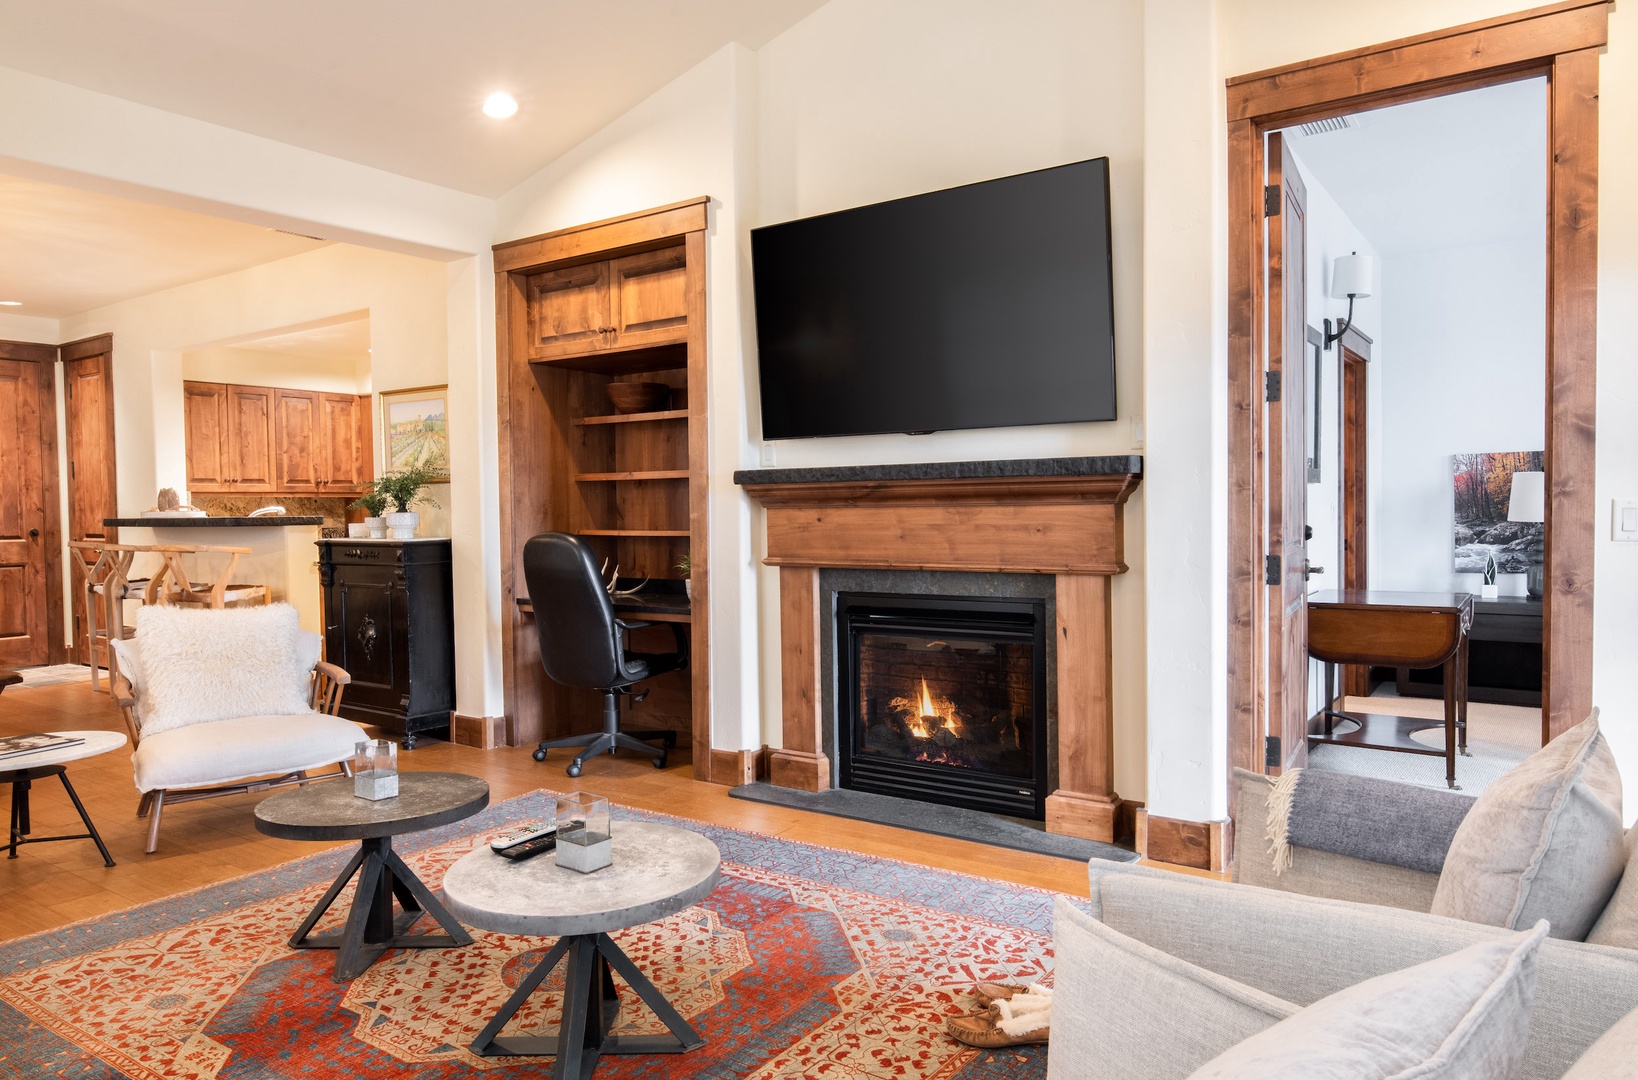 Main living room with gas fireplace